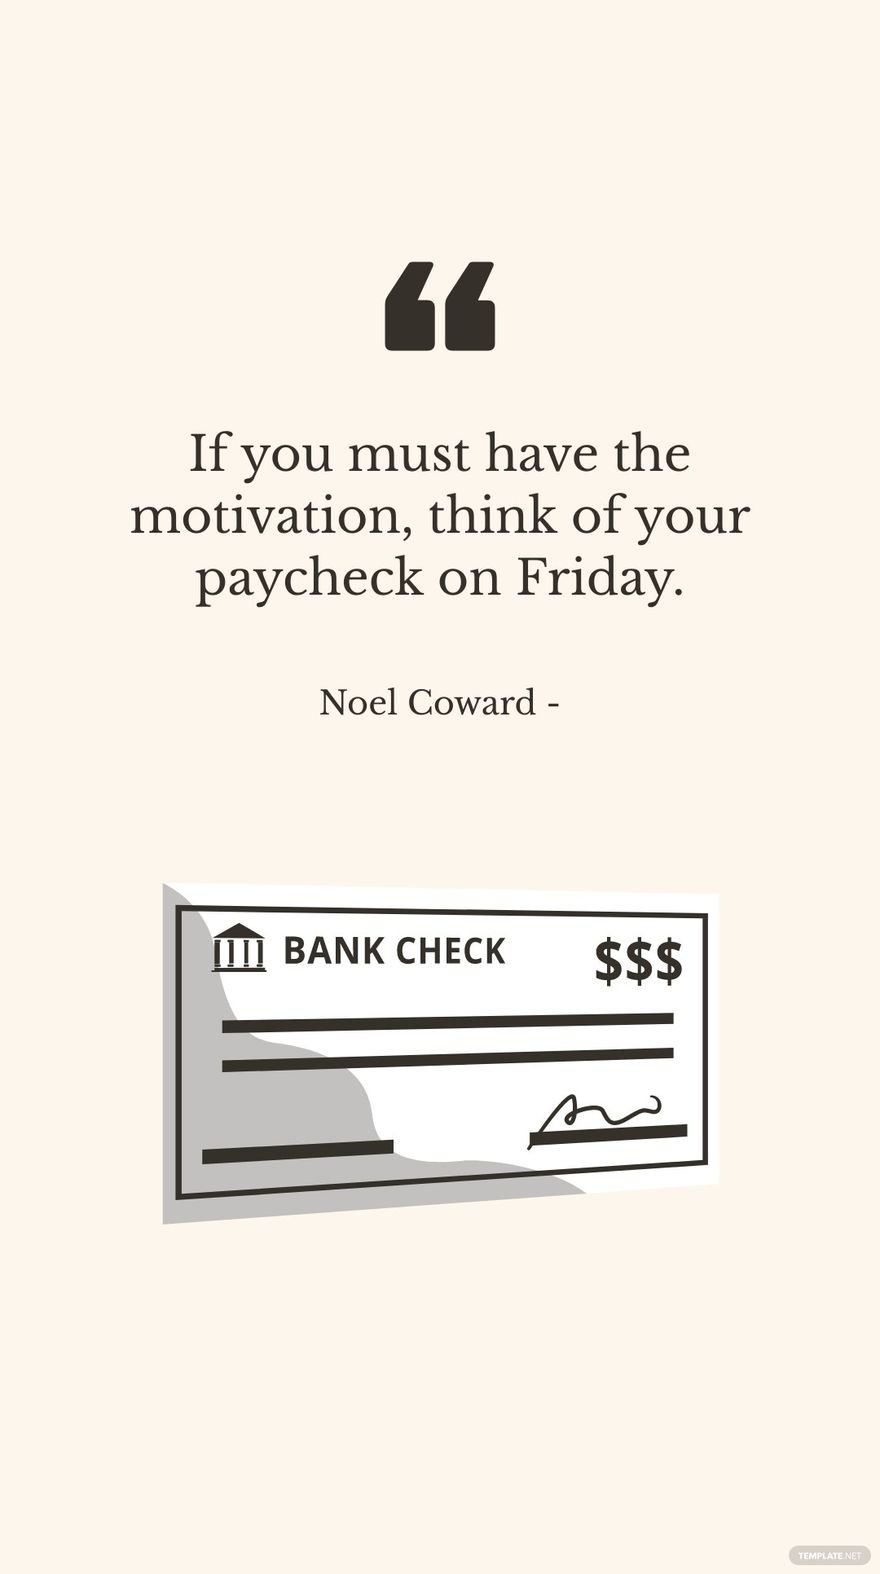 Free Noel Coward - If you must have the motivation, think of your paycheck on Friday.